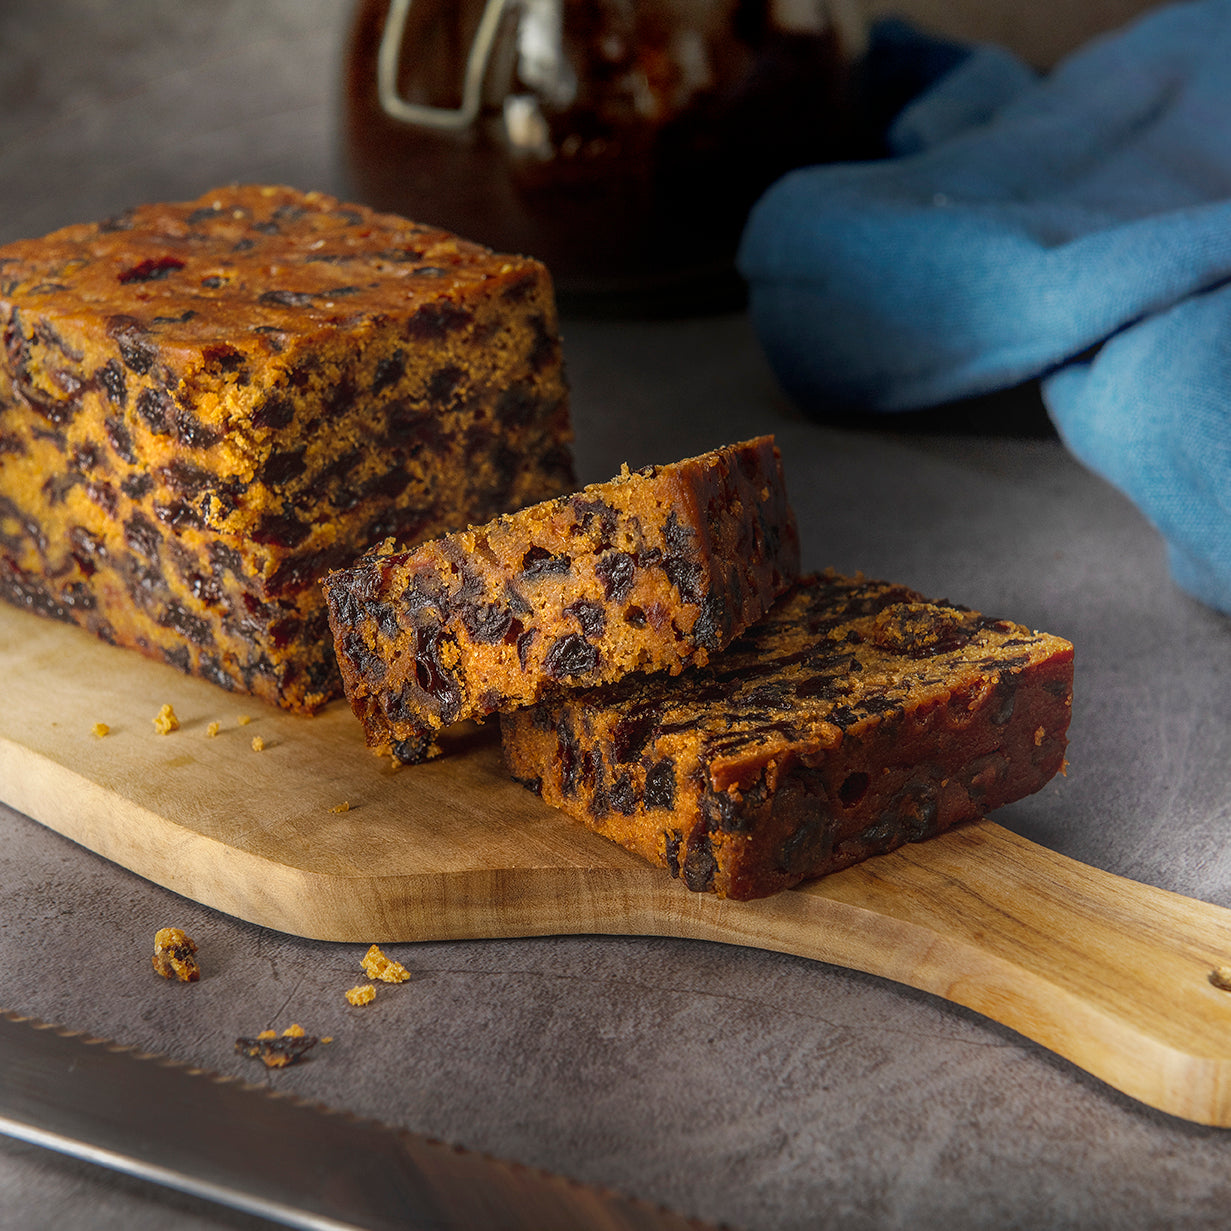 Bryson's Finest Fruit Cake is made with butter, eggs, raw sugar, currants, sultanas, and cherries.